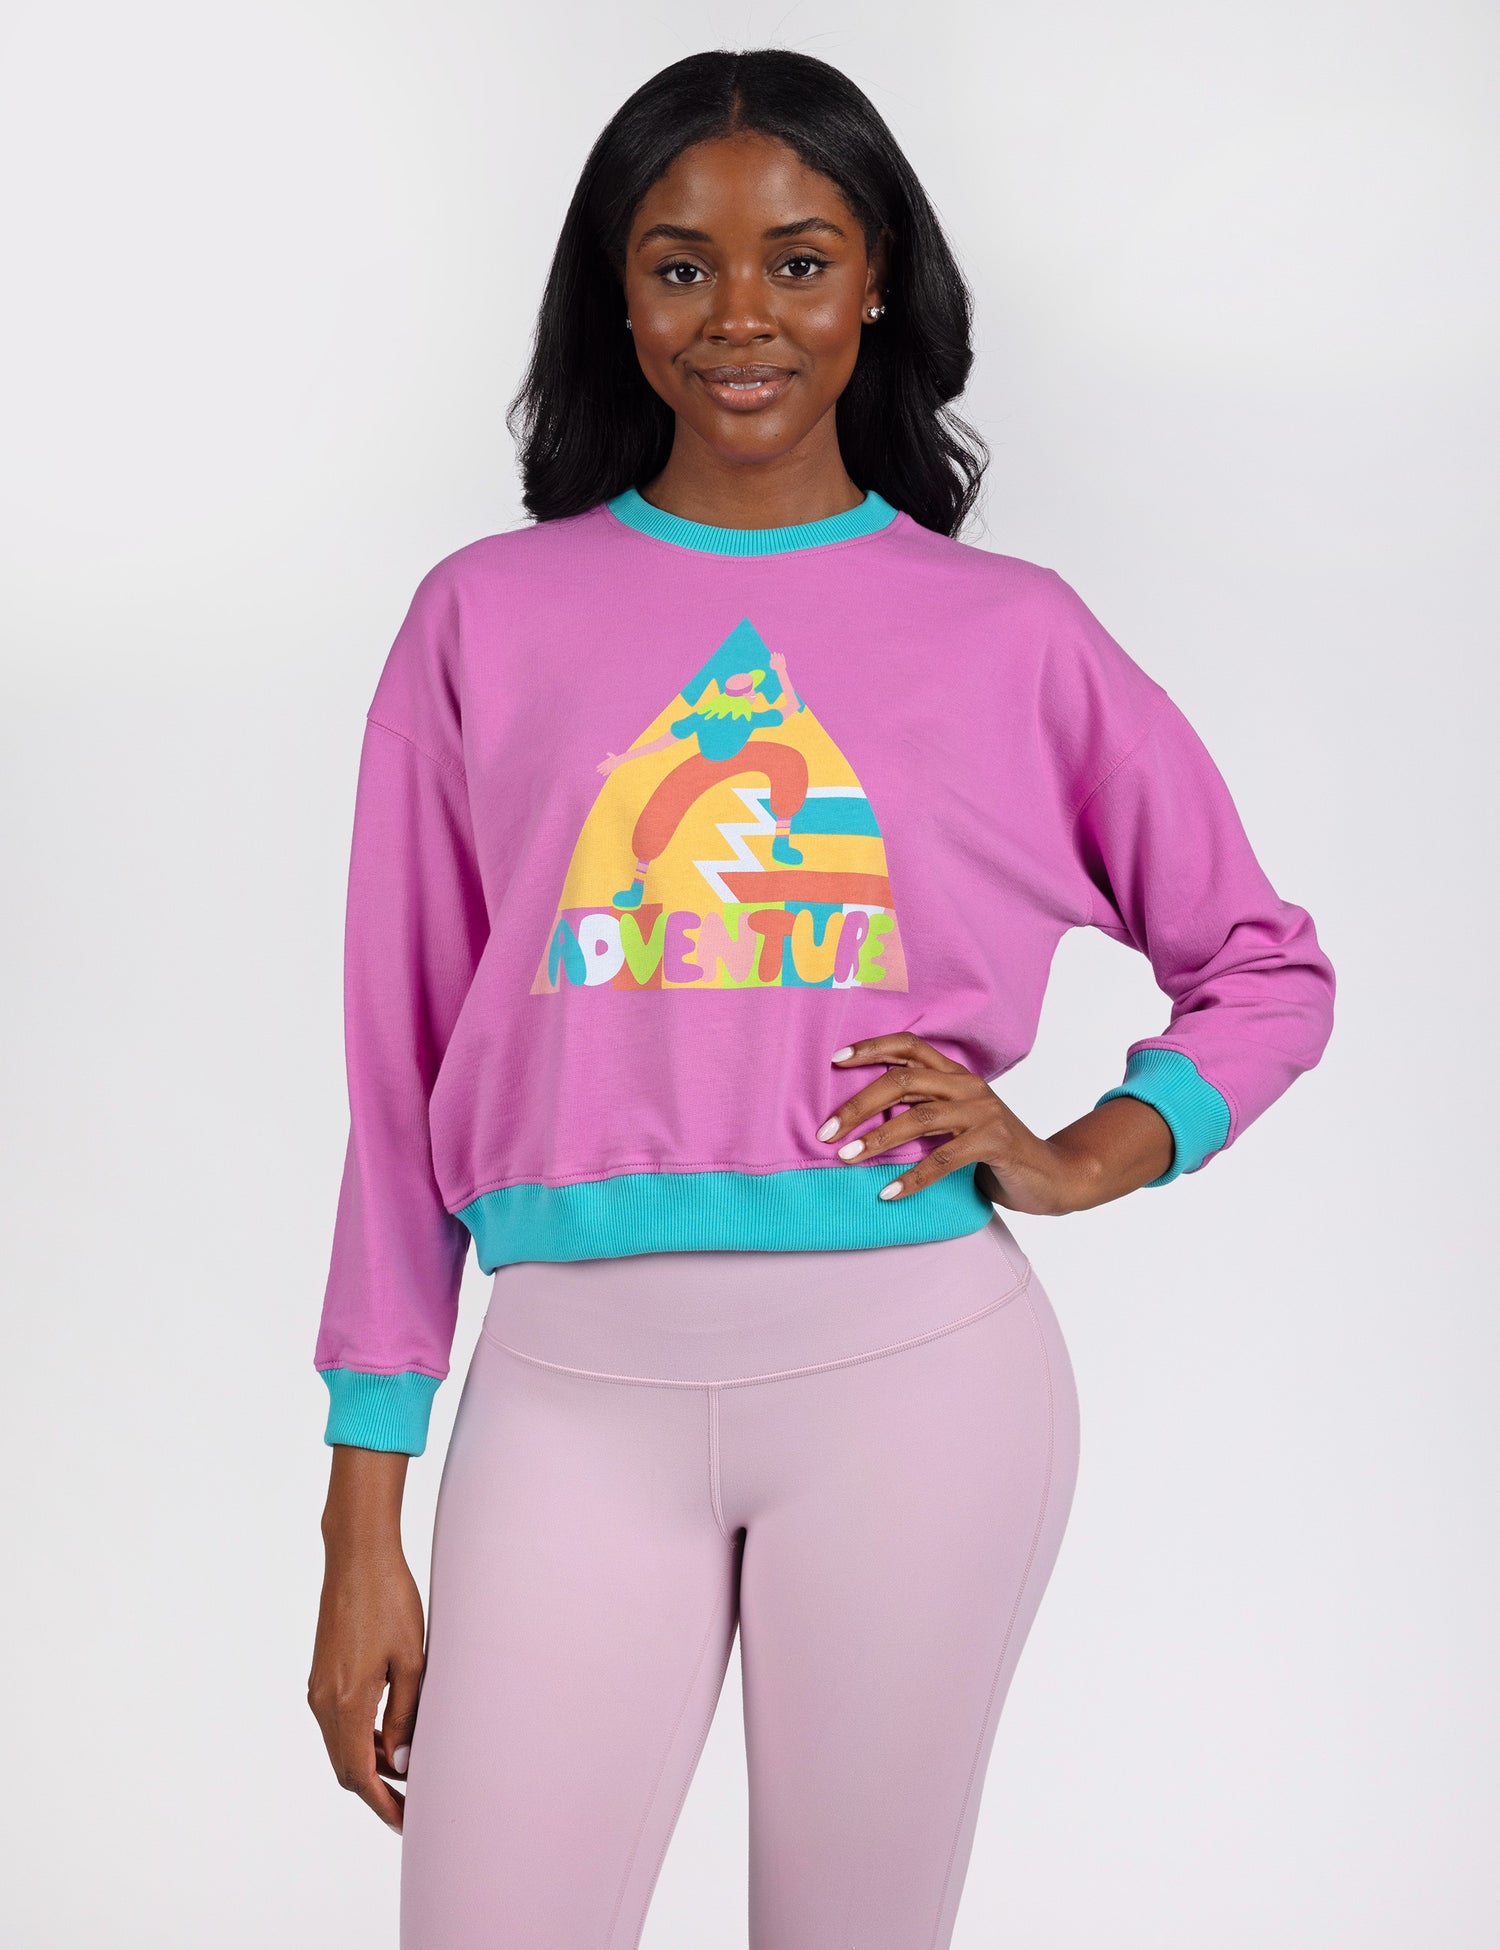 woman wearing a purple crop crew sweatshirt with colorful design in the middle